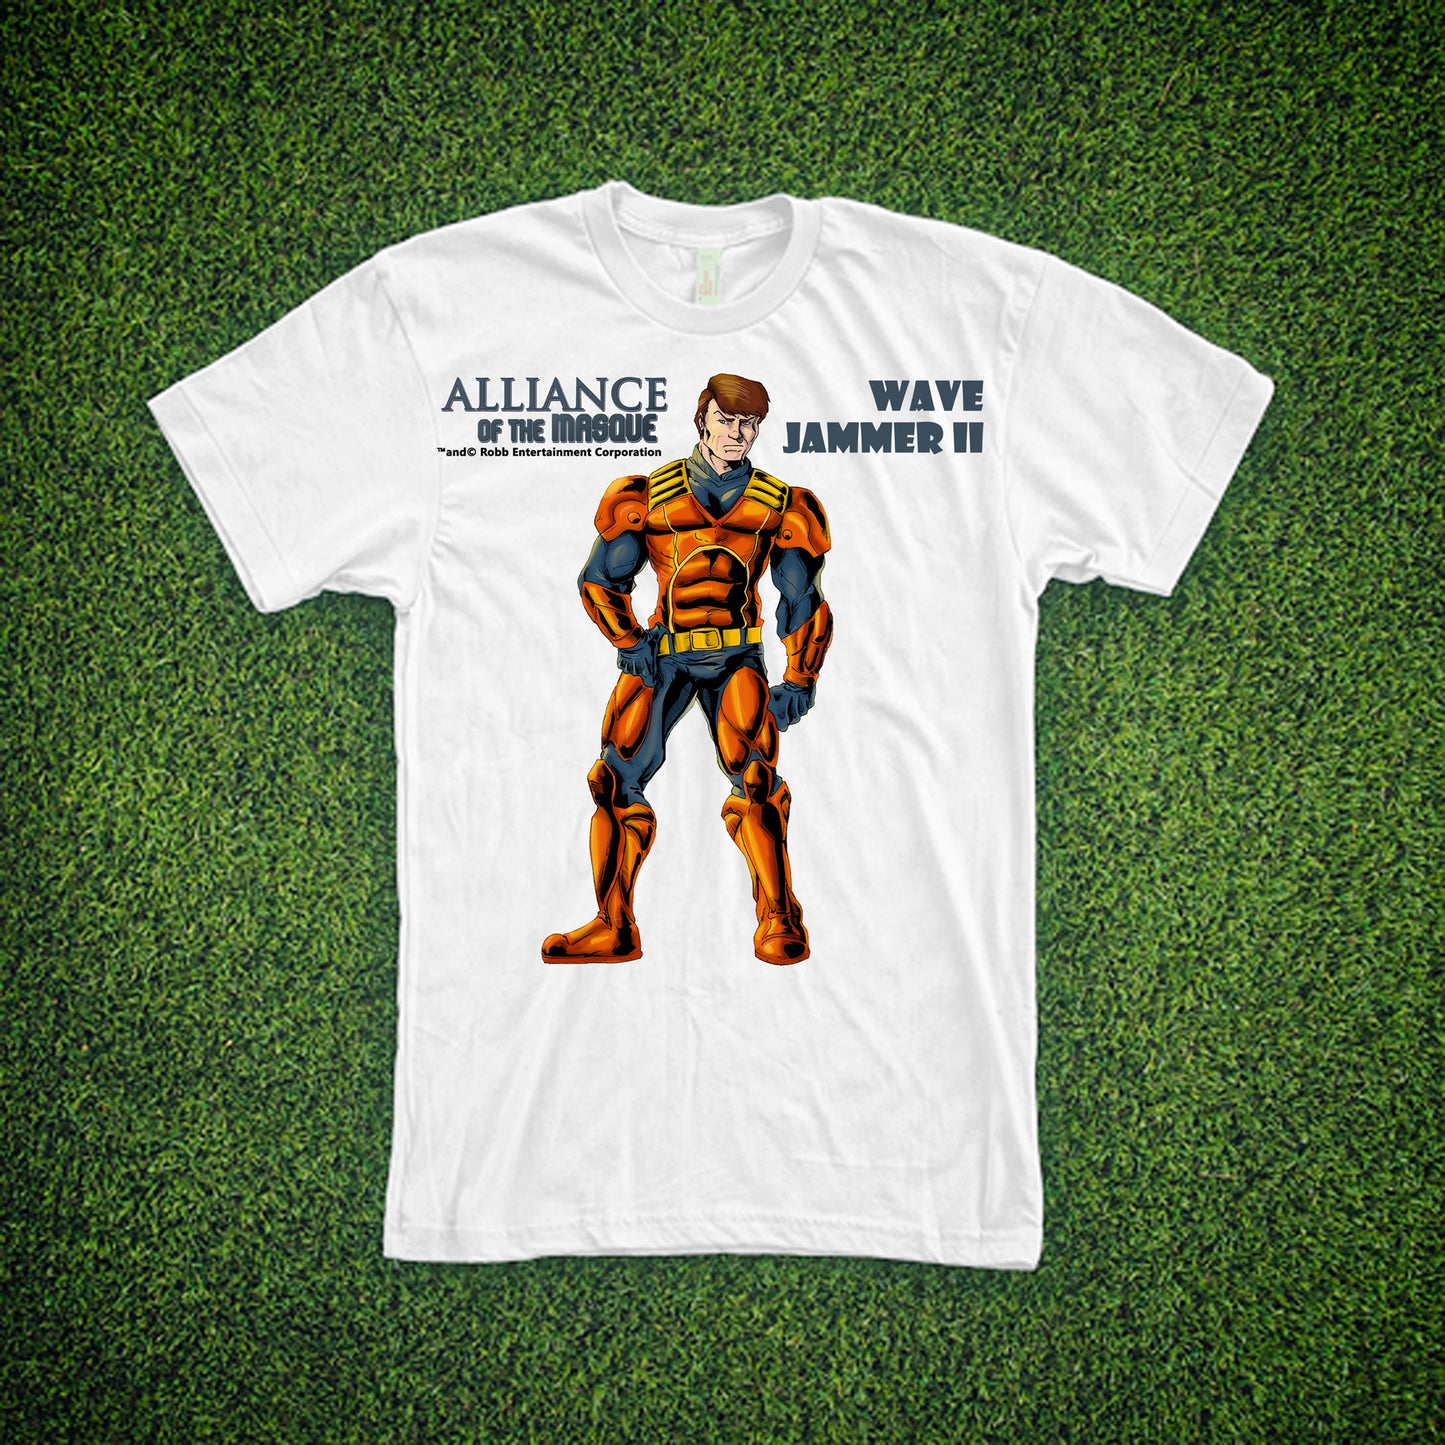 Alliance of the Masque - Wave Jammer II T-Shirt (white)